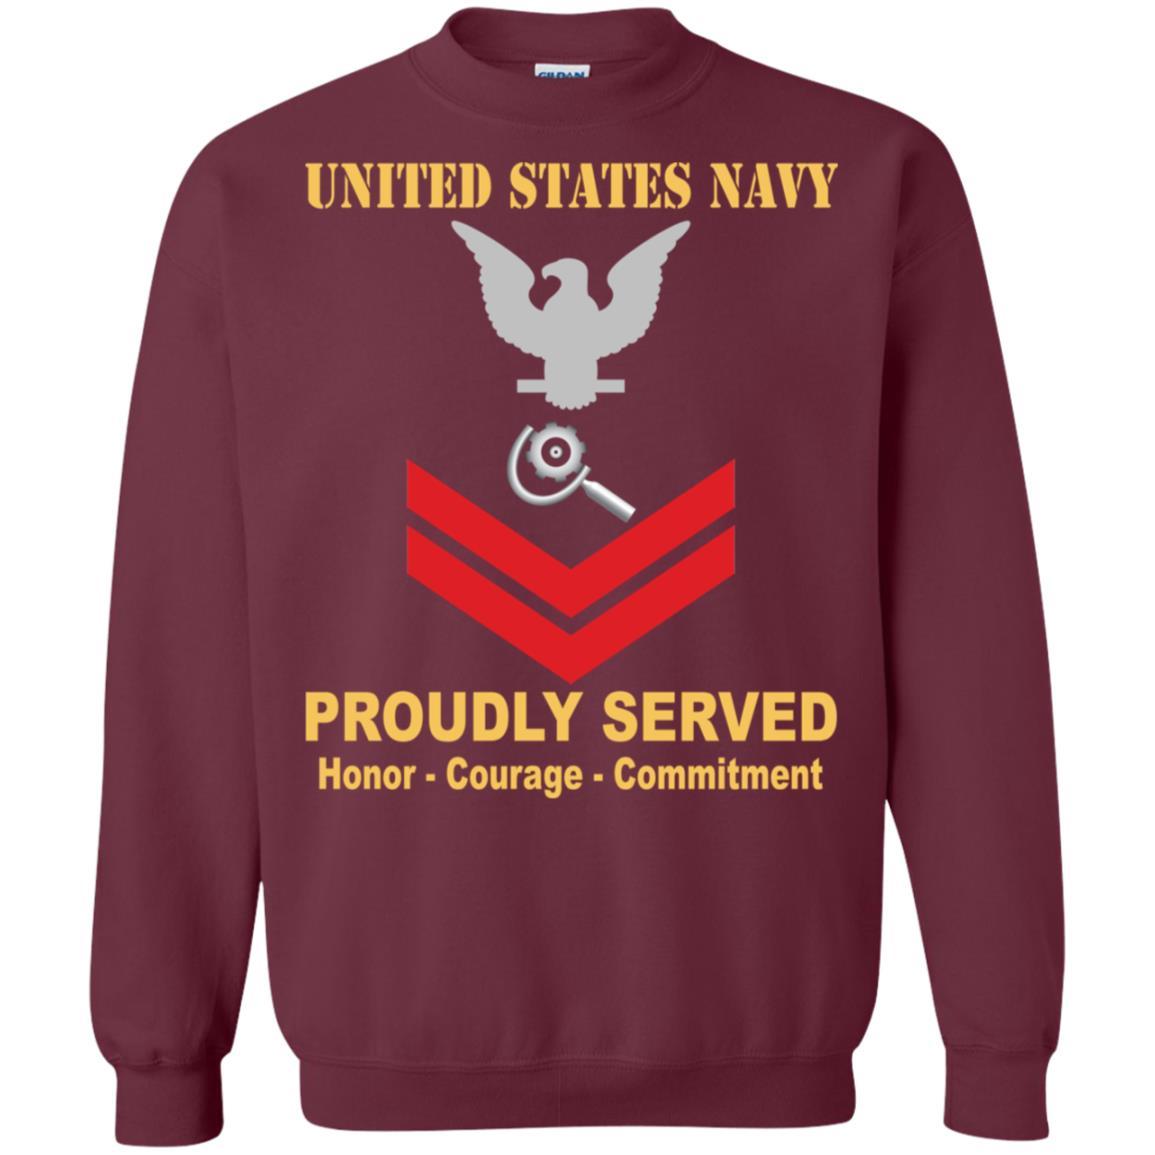 U.S Navy Machinery repairman Navy MR E-5 Rating Badges Proudly Served T-Shirt For Men On Front-TShirt-Navy-Veterans Nation